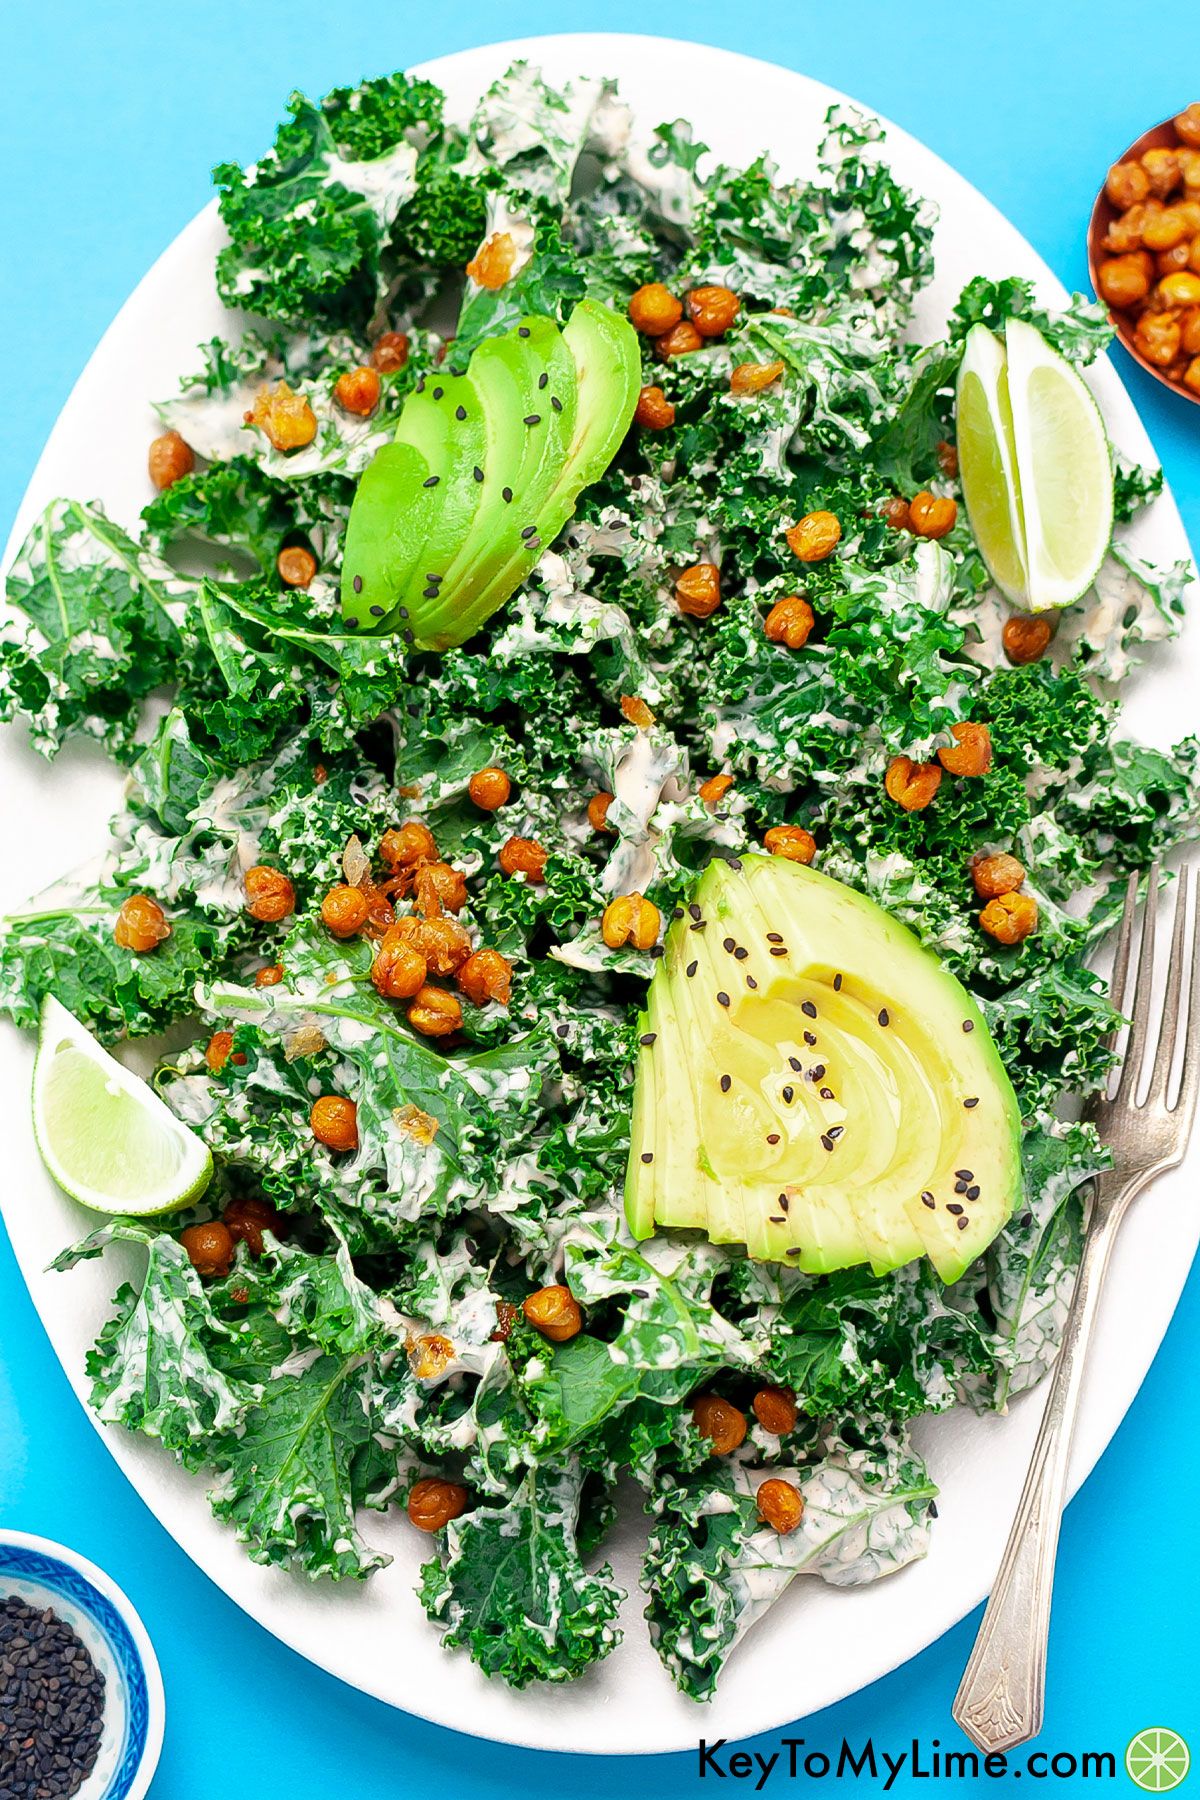 A kale and avocado salad on a white platter against a blue background.